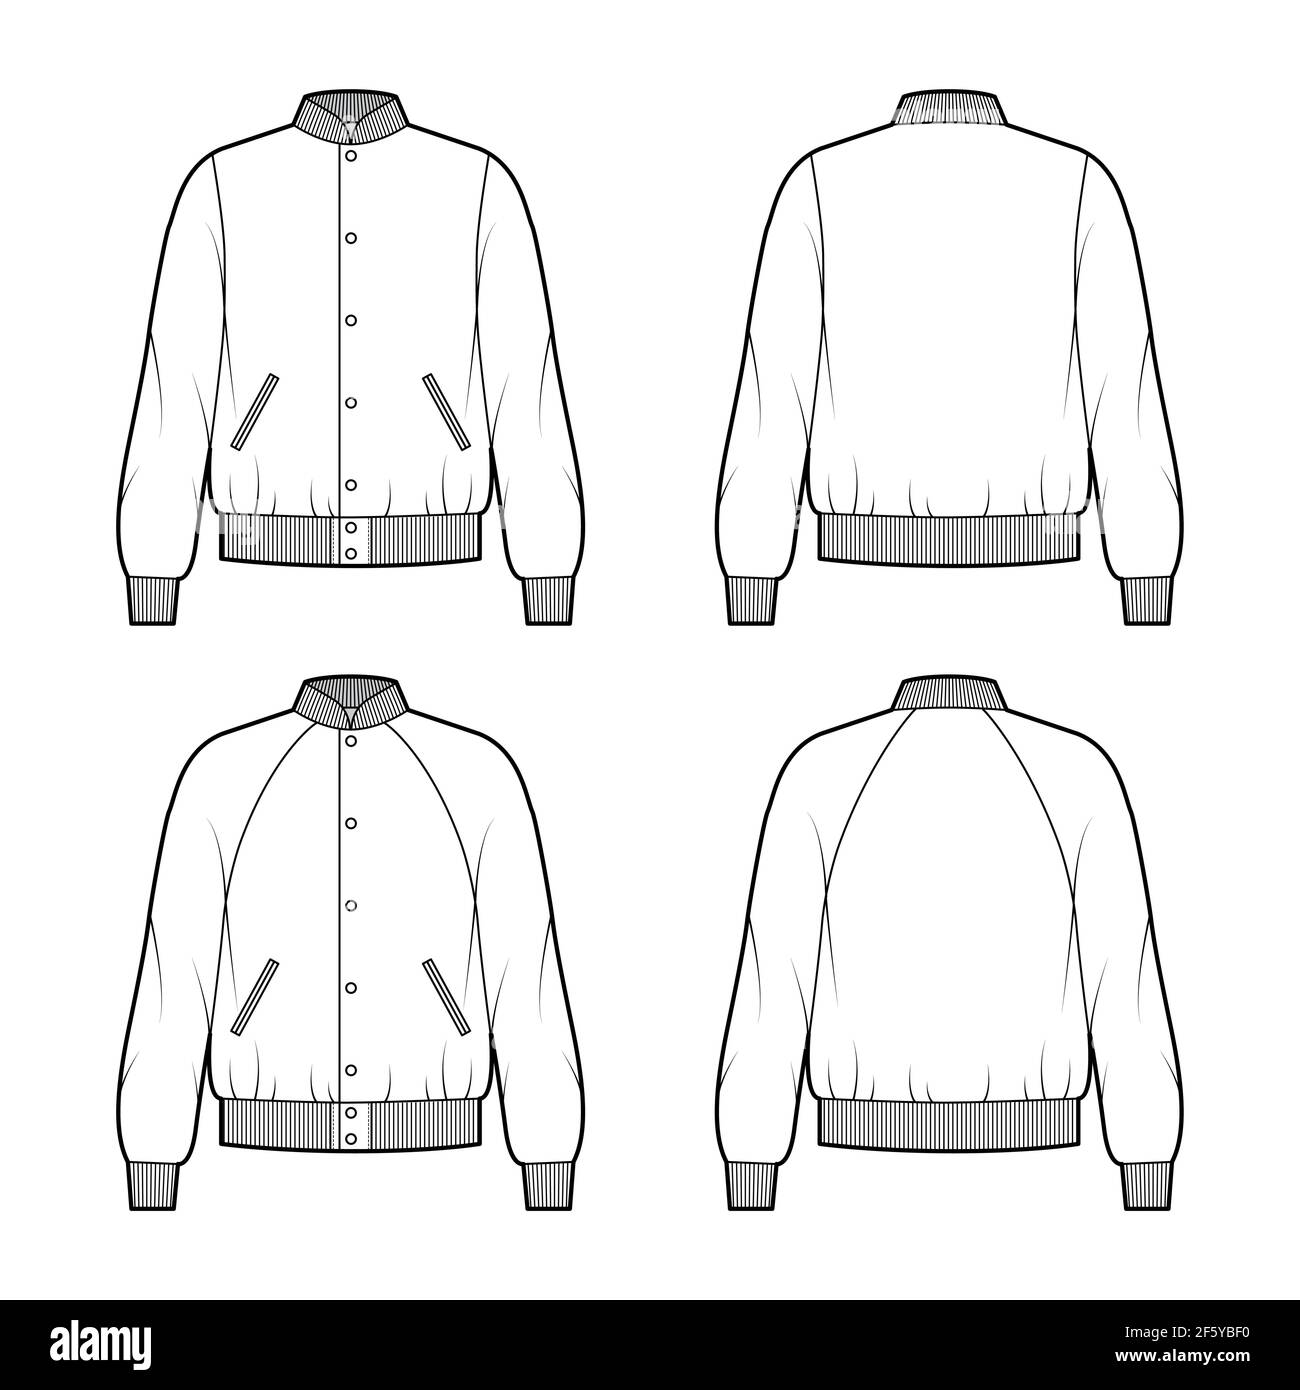 Set of Bomber jackets technical fashion illustration with Rib baseball collar, cuffs, oversized, long raglan sleeves, flap pockets. Flat coat template front, back white color. Women men unisex top CAD Stock Vector